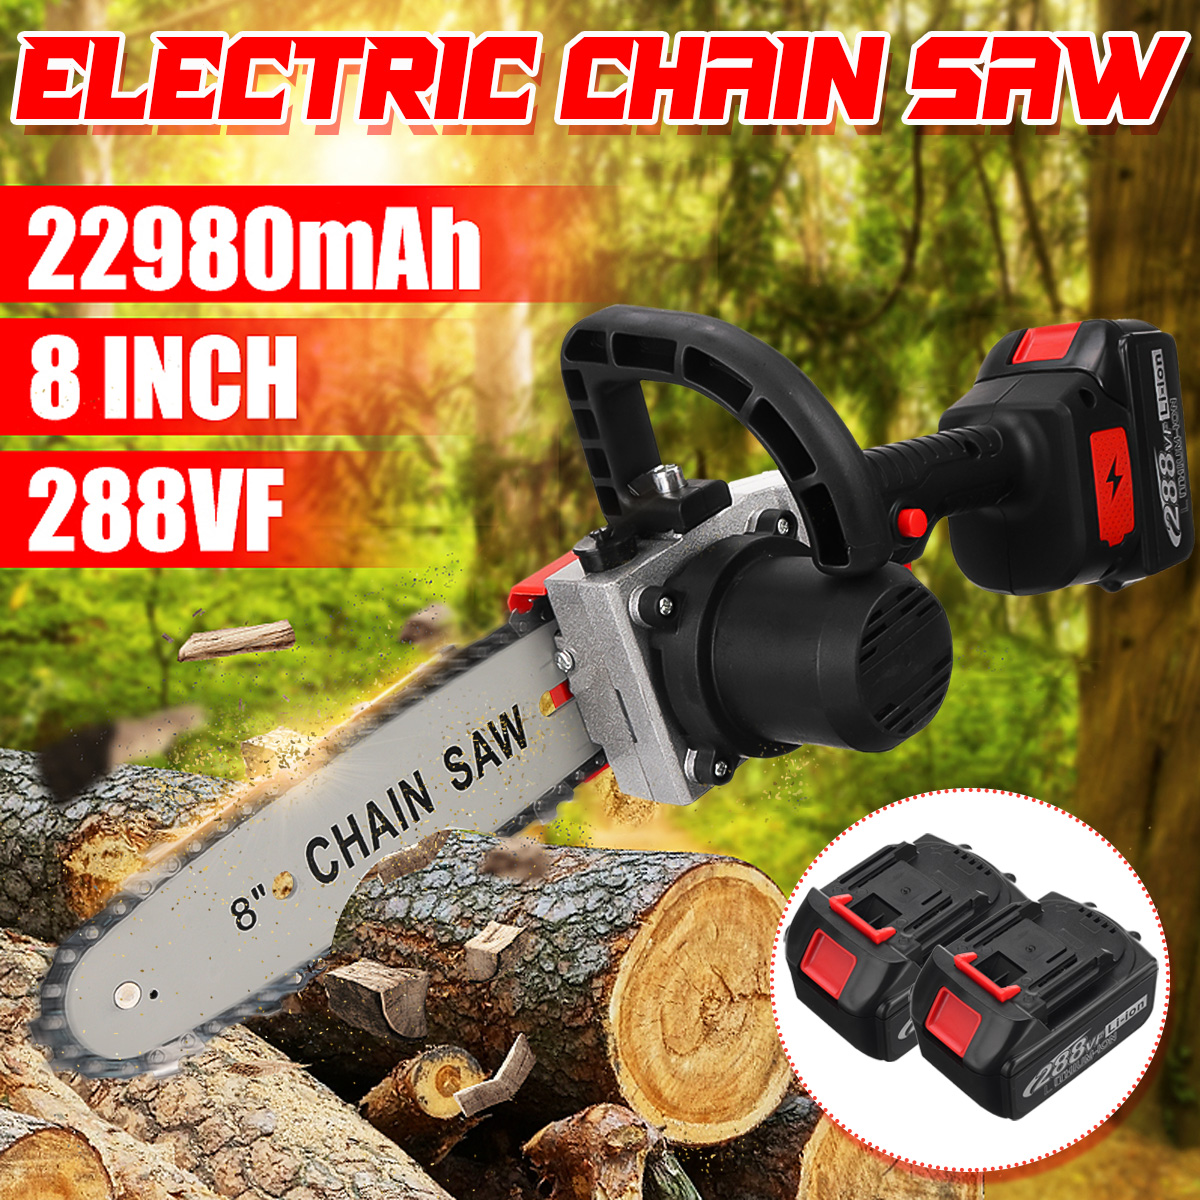 288VF-8Inch-Electric-Chain-Saw-Cordless-One-Hand-Chainsaw-Woodworking-Tool-W-12None-Battery-1845268-2